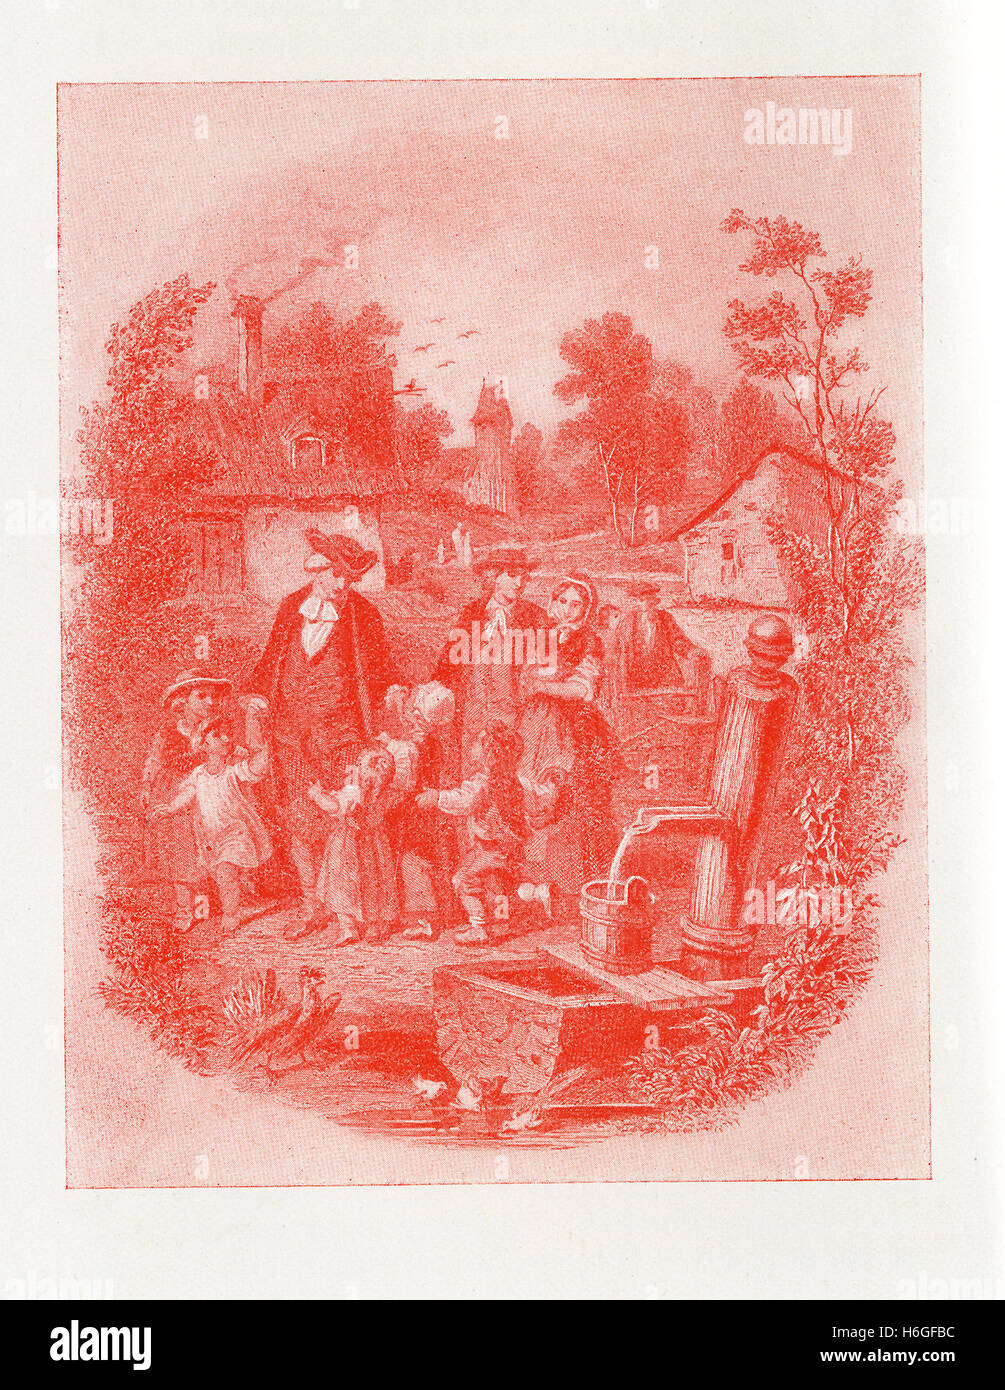 This illustration shows adults and young children, by a water fountain and with small structures in the background. This illustration accompanied am 1890s copy of the novel titled 'Twice Told Tales' by American writer Nathaniel Hawthorne ( 1804-1864). Stock Photo